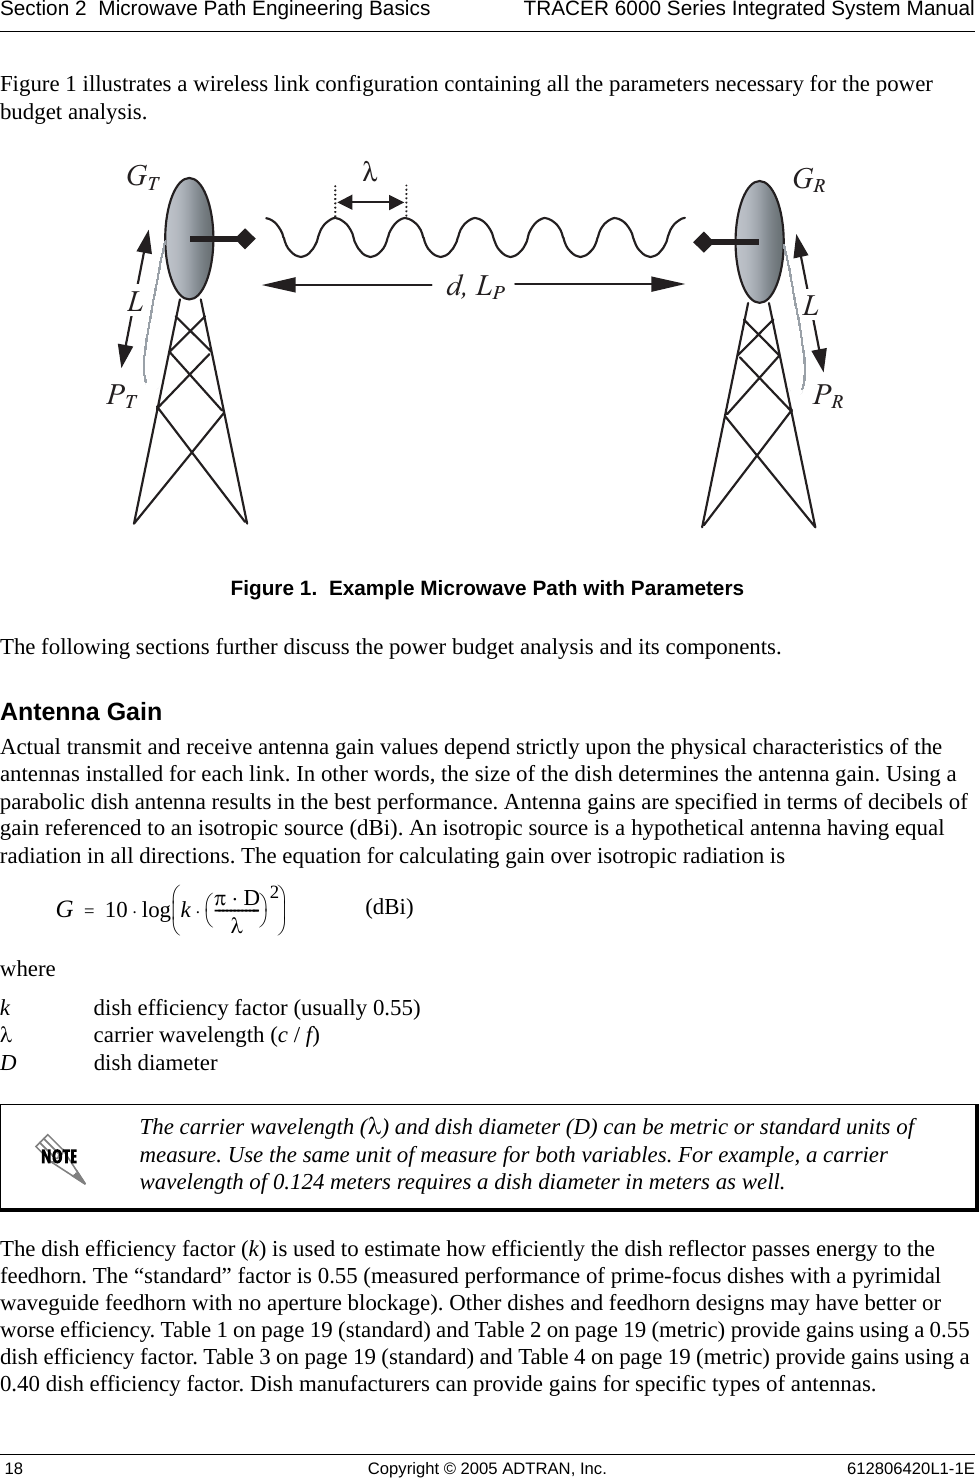 Section 2  Microwave Path Engineering Basics TRACER 6000 Series Integrated System Manual 18 Copyright © 2005 ADTRAN, Inc. 612806420L1-1EFigure 1 illustrates a wireless link configuration containing all the parameters necessary for the power budget analysis.Figure 1.  Example Microwave Path with ParametersThe following sections further discuss the power budget analysis and its components.Antenna GainActual transmit and receive antenna gain values depend strictly upon the physical characteristics of the antennas installed for each link. In other words, the size of the dish determines the antenna gain. Using a parabolic dish antenna results in the best performance. Antenna gains are specified in terms of decibels of gain referenced to an isotropic source (dBi). An isotropic source is a hypothetical antenna having equal radiation in all directions. The equation for calculating gain over isotropic radiation iswhere kdish efficiency factor (usually 0.55) λcarrier wavelength (c / f)  Ddish diameterThe dish efficiency factor (k) is used to estimate how efficiently the dish reflector passes energy to the feedhorn. The “standard” factor is 0.55 (measured performance of prime-focus dishes with a pyrimidal waveguide feedhorn with no aperture blockage). Other dishes and feedhorn designs may have better or worse efficiency. Table 1 on page 19 (standard) and Table 2 on page 19 (metric) provide gains using a 0.55 dish efficiency factor. Table 3 on page 19 (standard) and Table 4 on page 19 (metric) provide gains using a 0.40 dish efficiency factor. Dish manufacturers can provide gains for specific types of antennas.The carrier wavelength (λ) and dish diameter (D) can be metric or standard units of measure. Use the same unit of measure for both variables. For example, a carrier wavelength of 0.124 meters requires a dish diameter in meters as well. GTGRd, LPPTPRλLLG10 log kπD⋅λ------------⎝⎠⎛⎞2⋅⎝⎠⎜⎟⎛⎞⋅=(dBi)